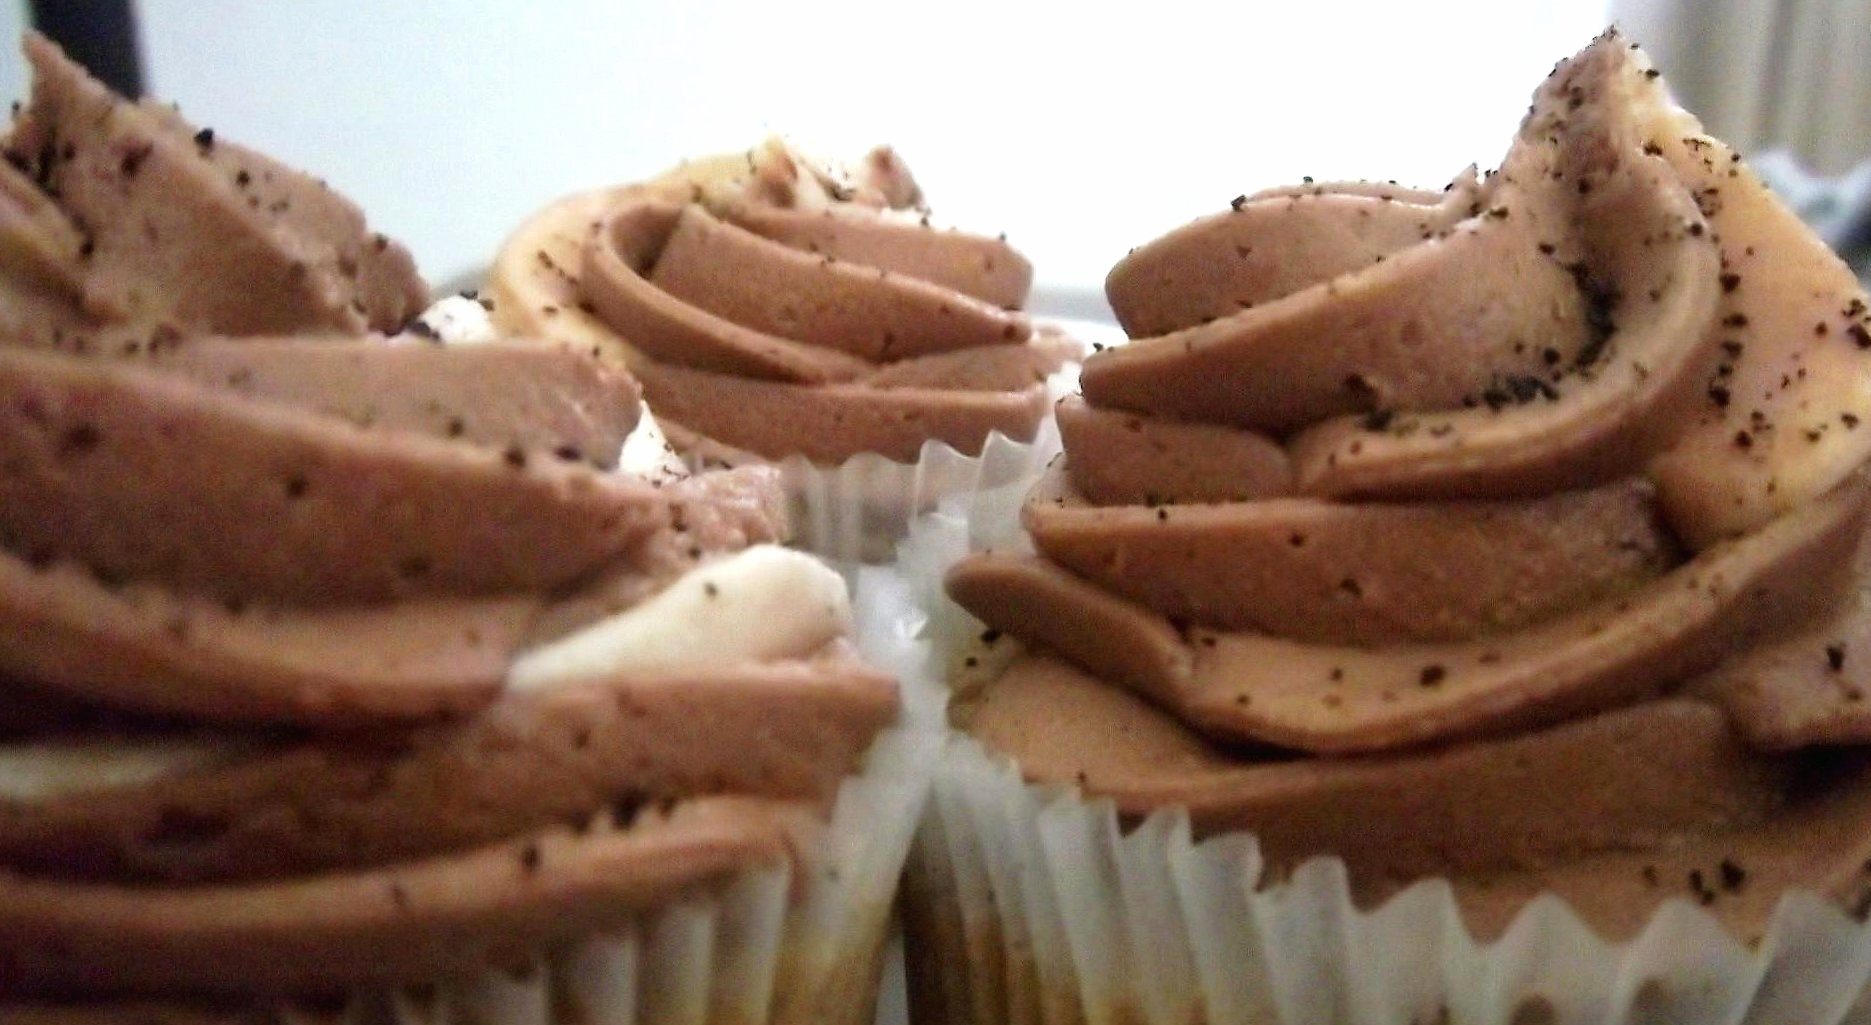 Coffee cupcakes wallpapers HD quality